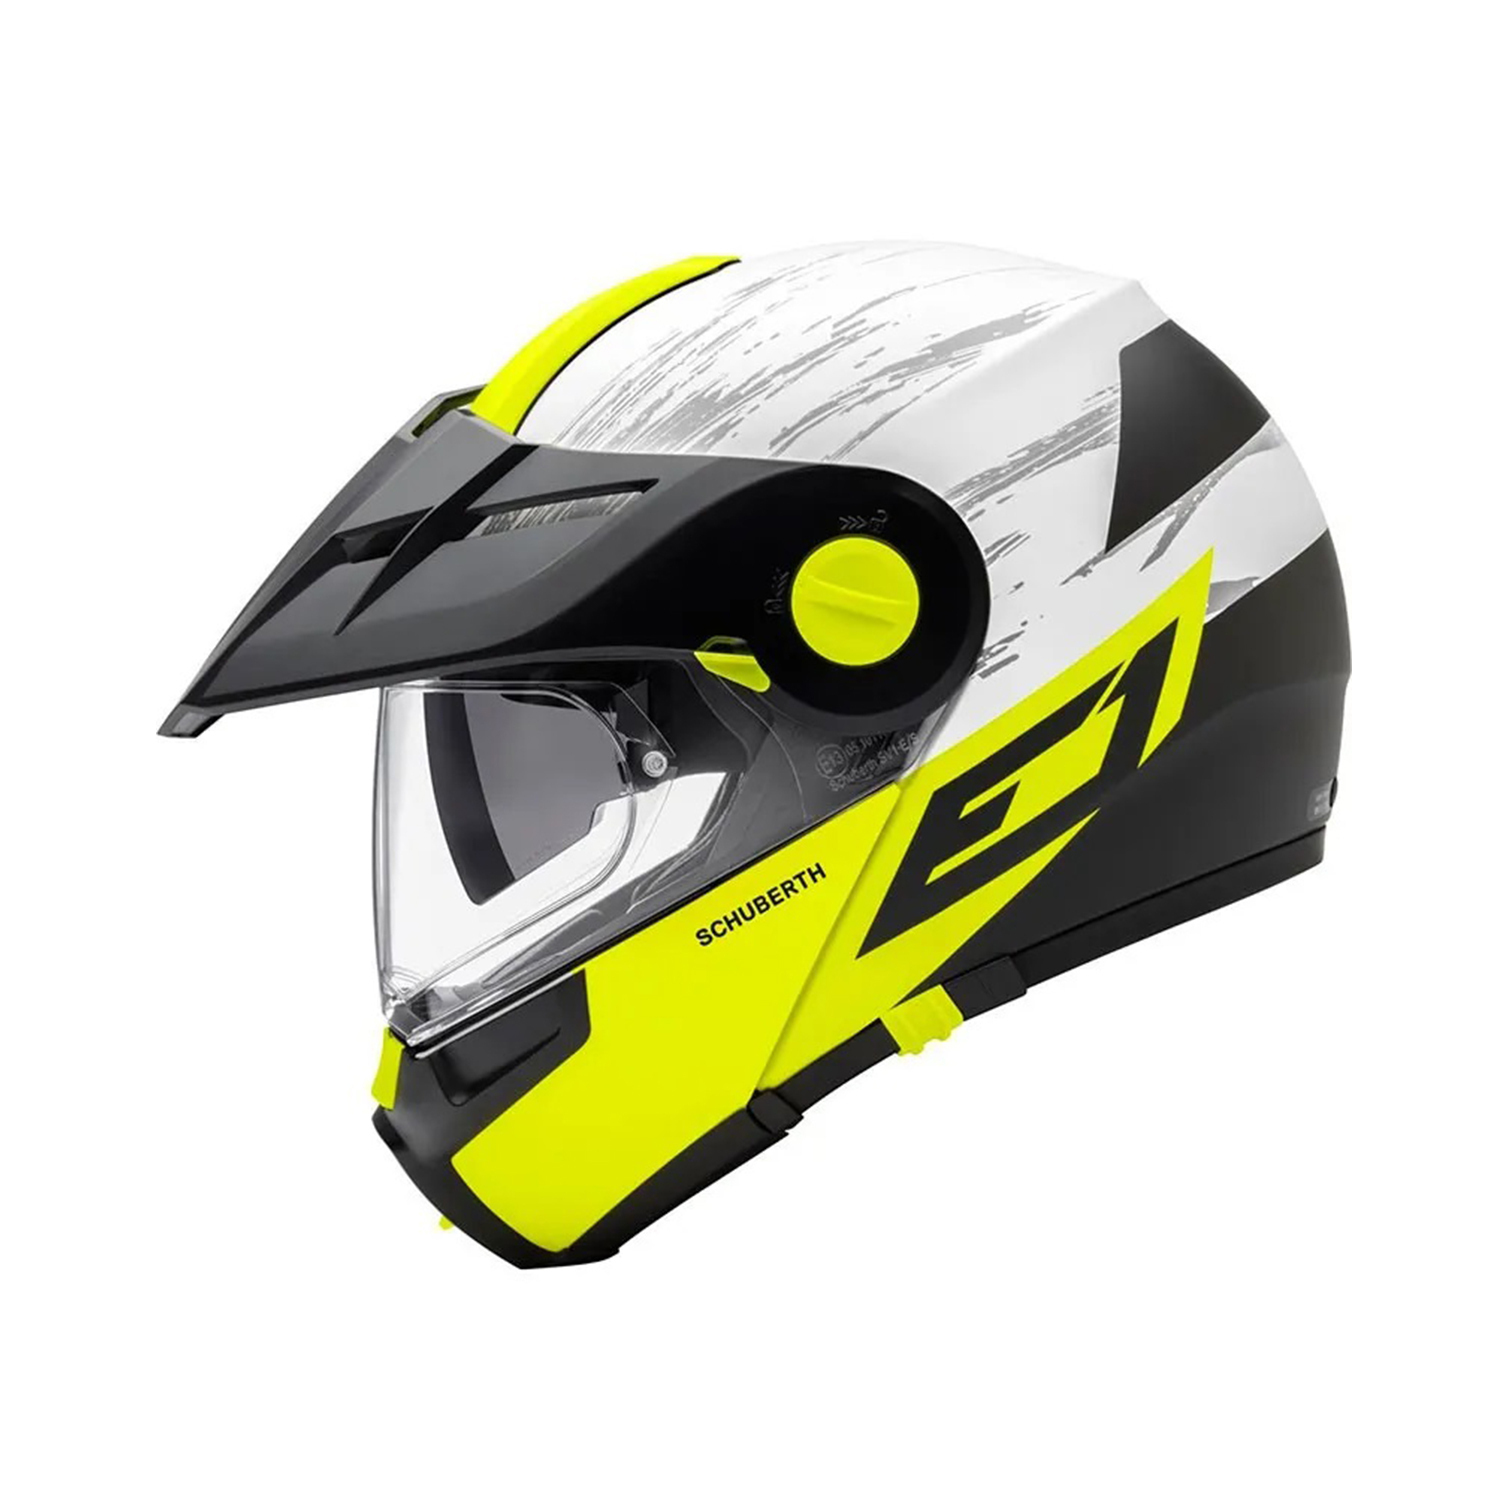 Schuberth E1 Adventure Helmet Crossfire Yellow - Available in Various Sizes